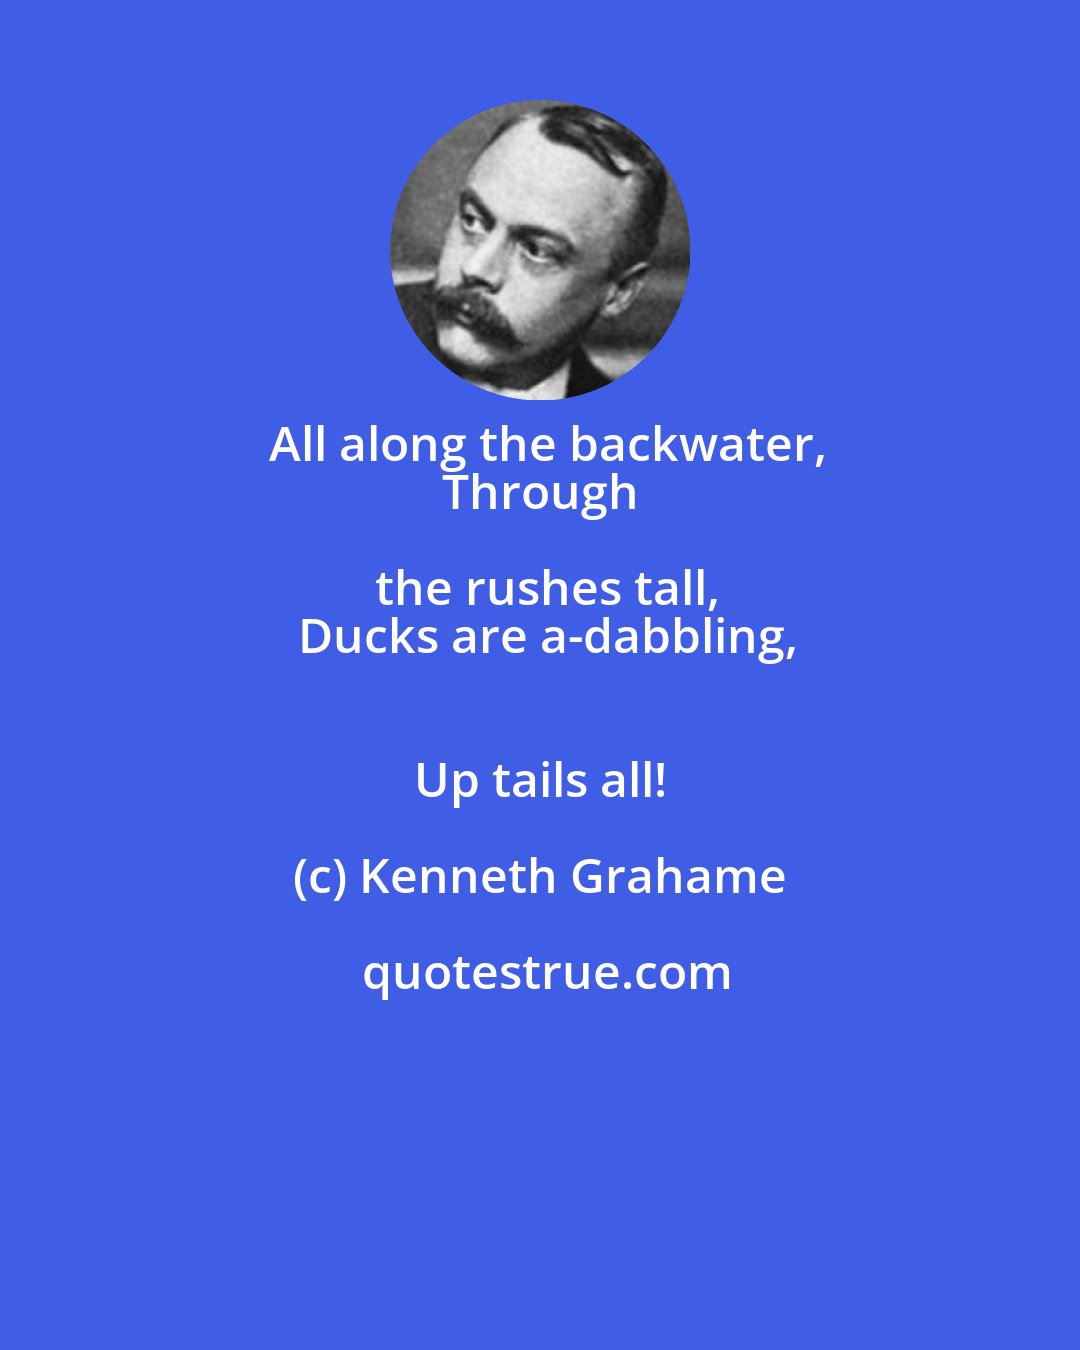 Kenneth Grahame: All along the backwater,
 Through the rushes tall,
 Ducks are a-dabbling,
 Up tails all!